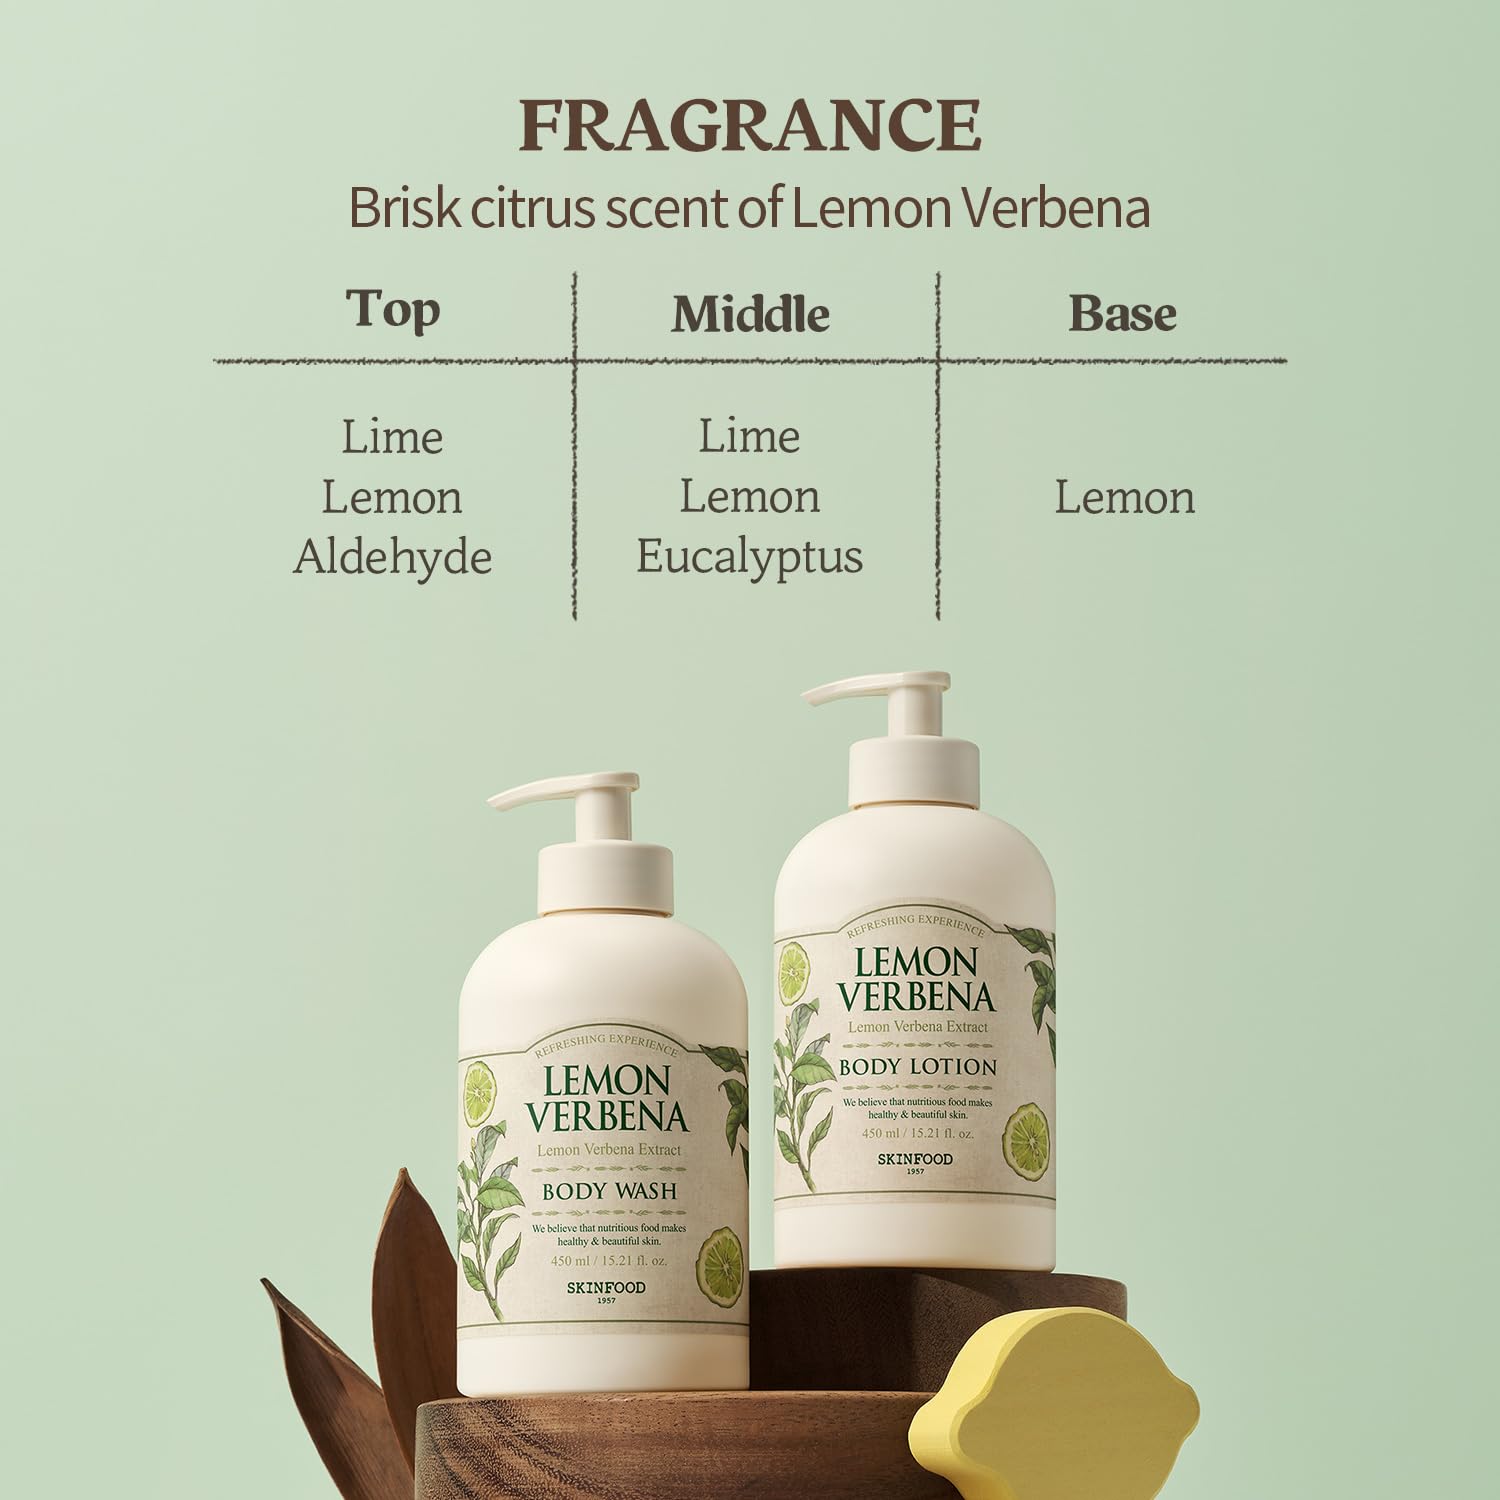 SKINFOOD Lemon Verbena Body Lotion 450g - Hydrates and Smoothes Dry Skin - Verbena Extract, Leaves Skin Freshly Moisturized - Contains a Brisk Citrus Scent of Lemon Verbena Extract - Body Lotion for Men & Women (15.2 fl.oz.) : Beauty & Personal Care